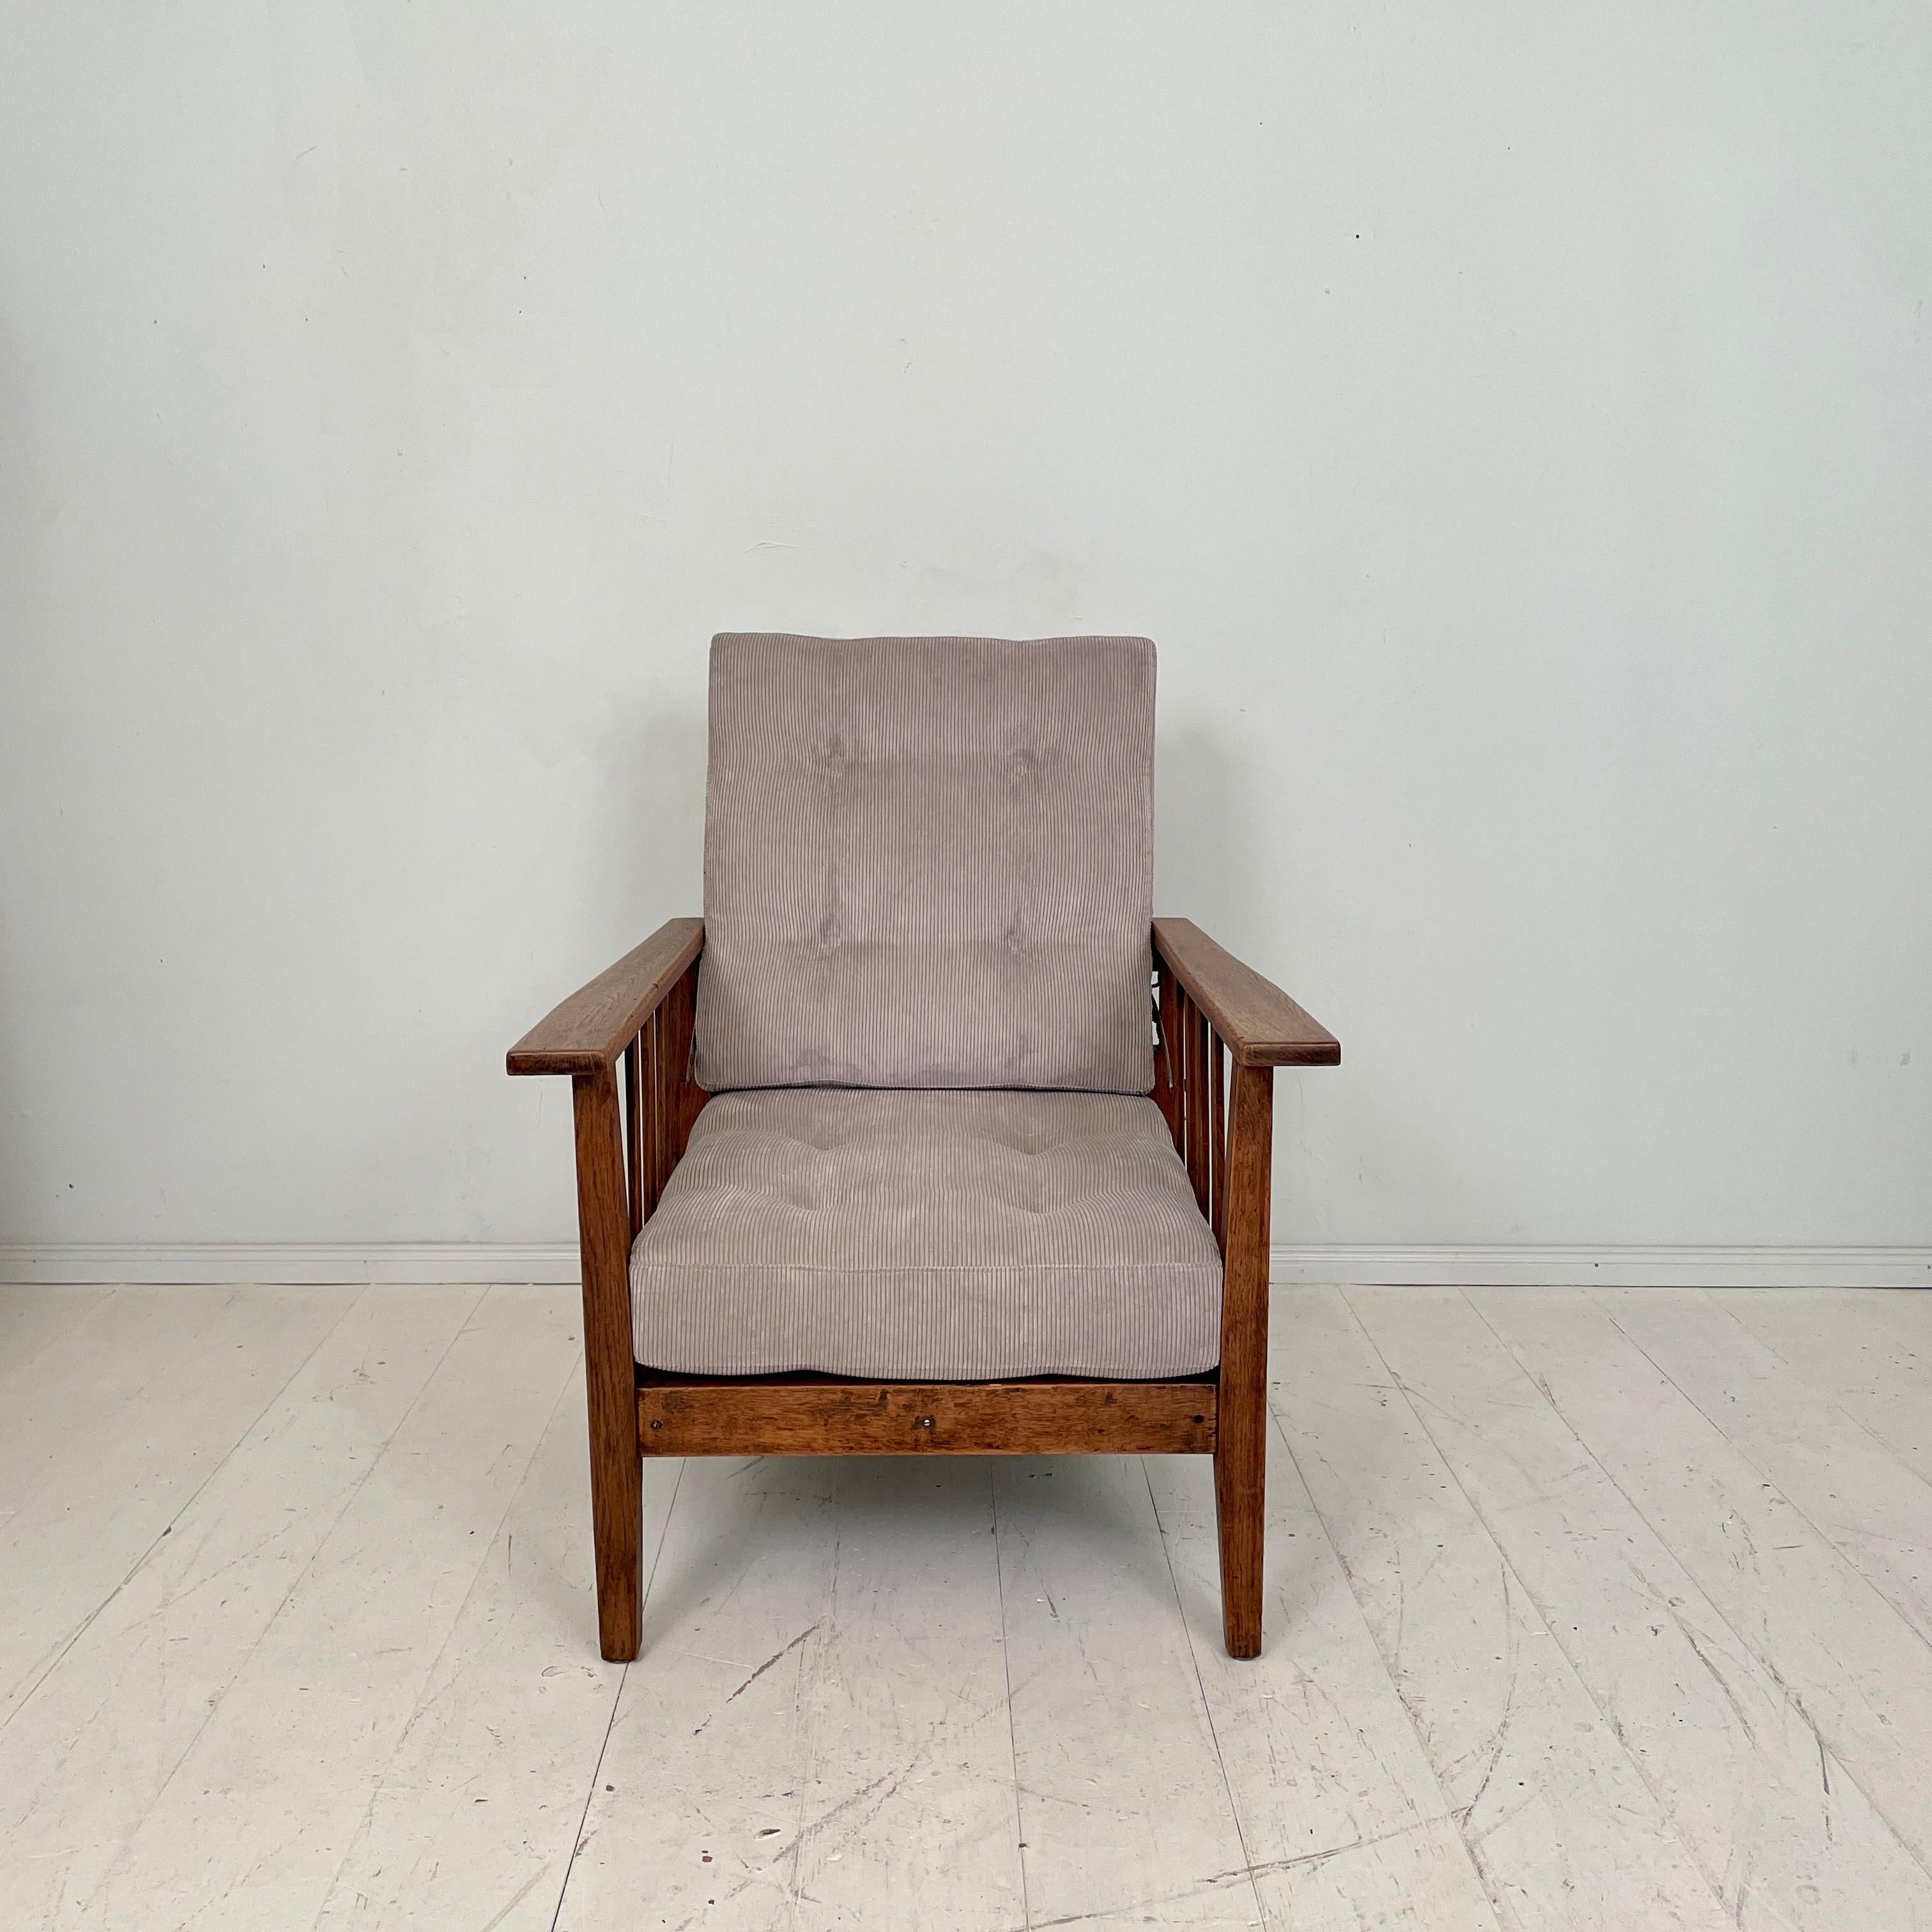 This beautiful English Arts and Crafts Morris Armchair was made around 1910. It is out of solid oak and the upholstery was re-done in grey cord.
Beautiful Patina. The back is adjustable in five different positions.
A unique piece which is a great